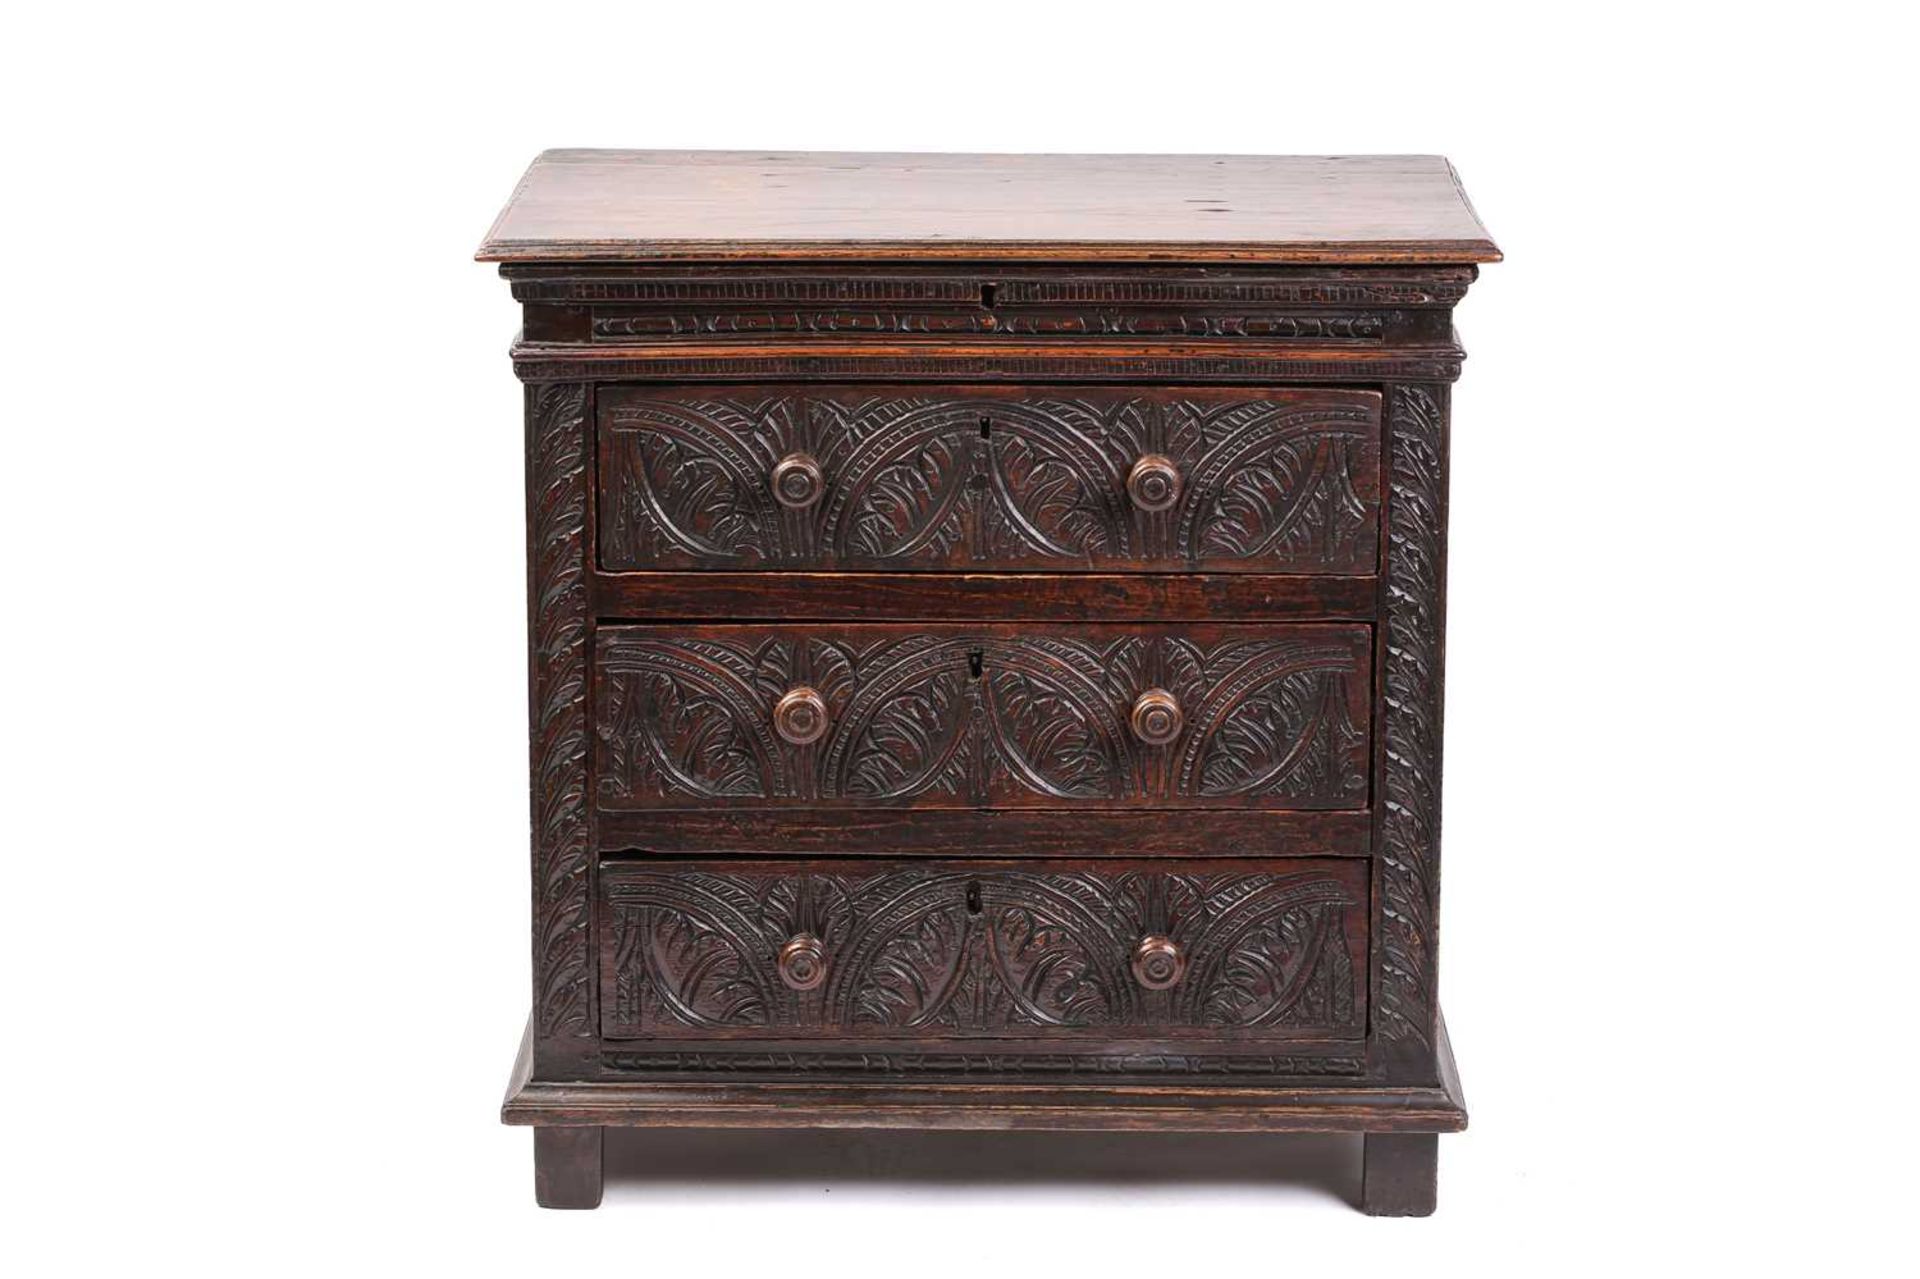 A carved oak 17th-century style three-drawer chest (17th century period timber and later, re-